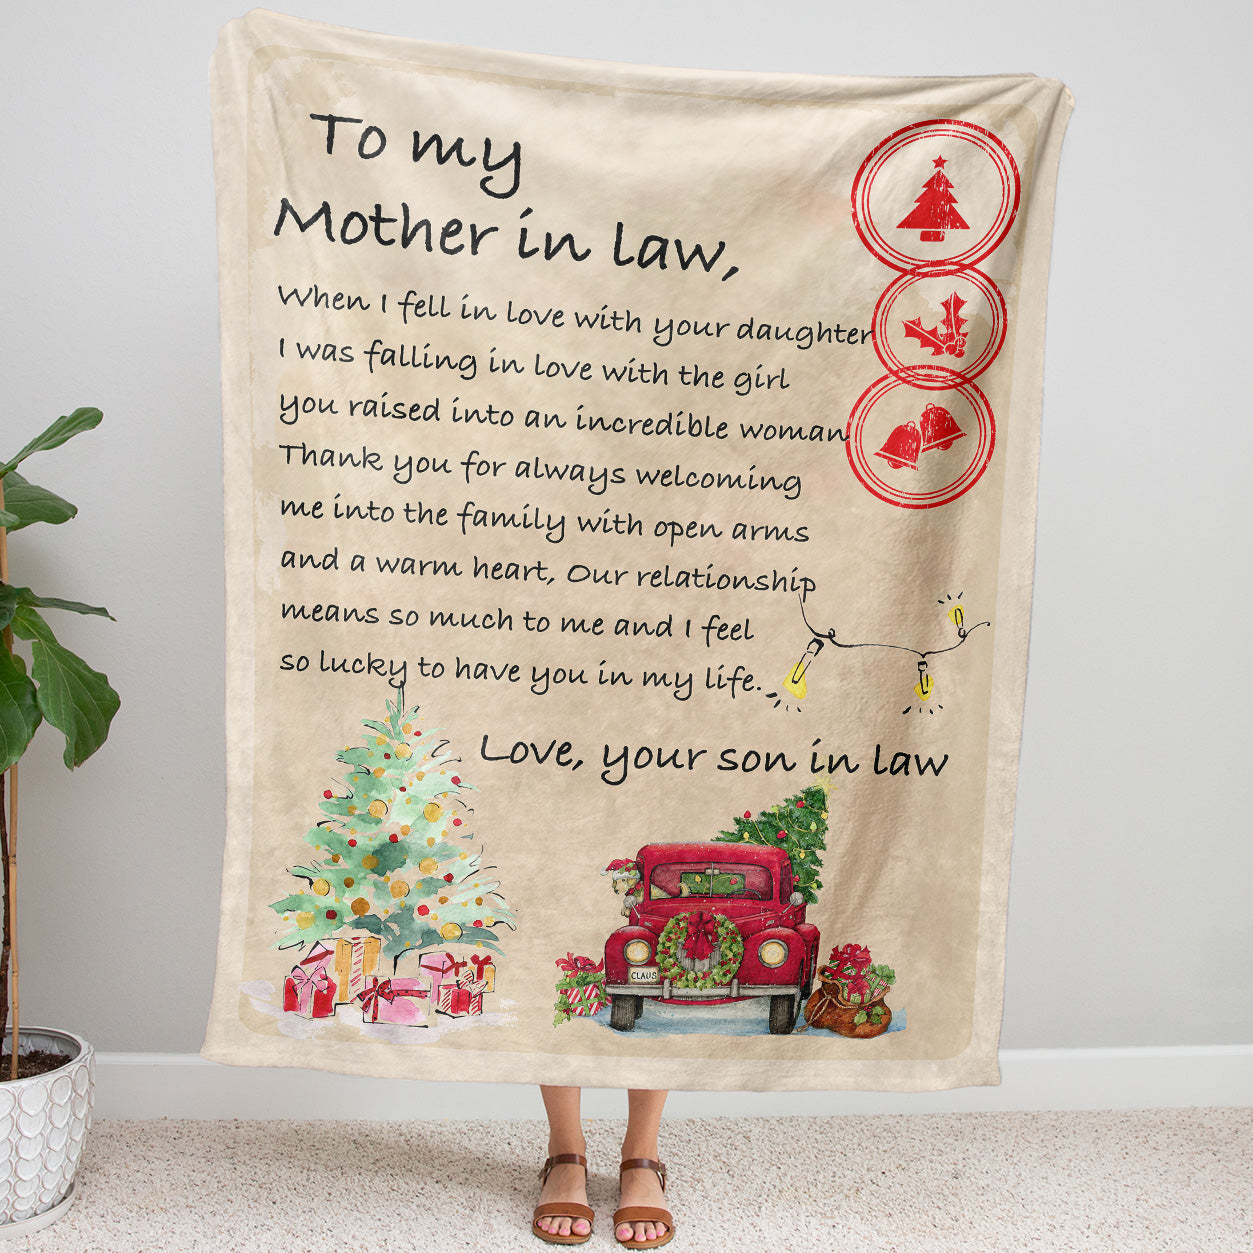 Blanket Christmas Gift ideas for Mother in Law from Son in Law Customize Personalize Love with Your Daughter 20121111 - Sherpa Blanket